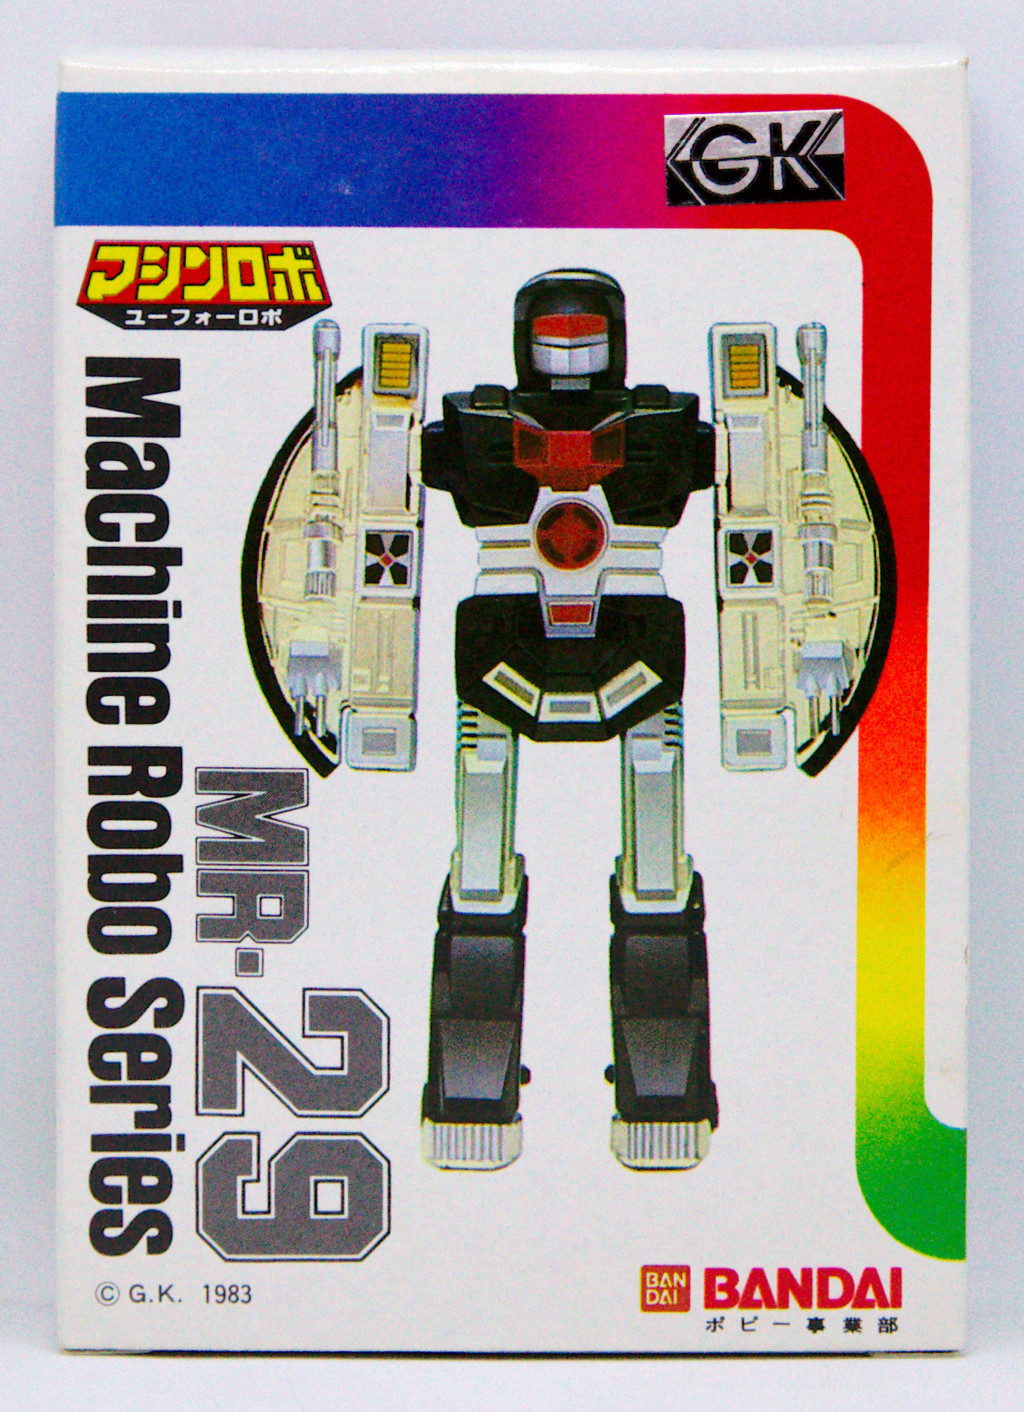 Pilgrim's collection (Gobots, Transformers...) - Page 23 Mr-29_12